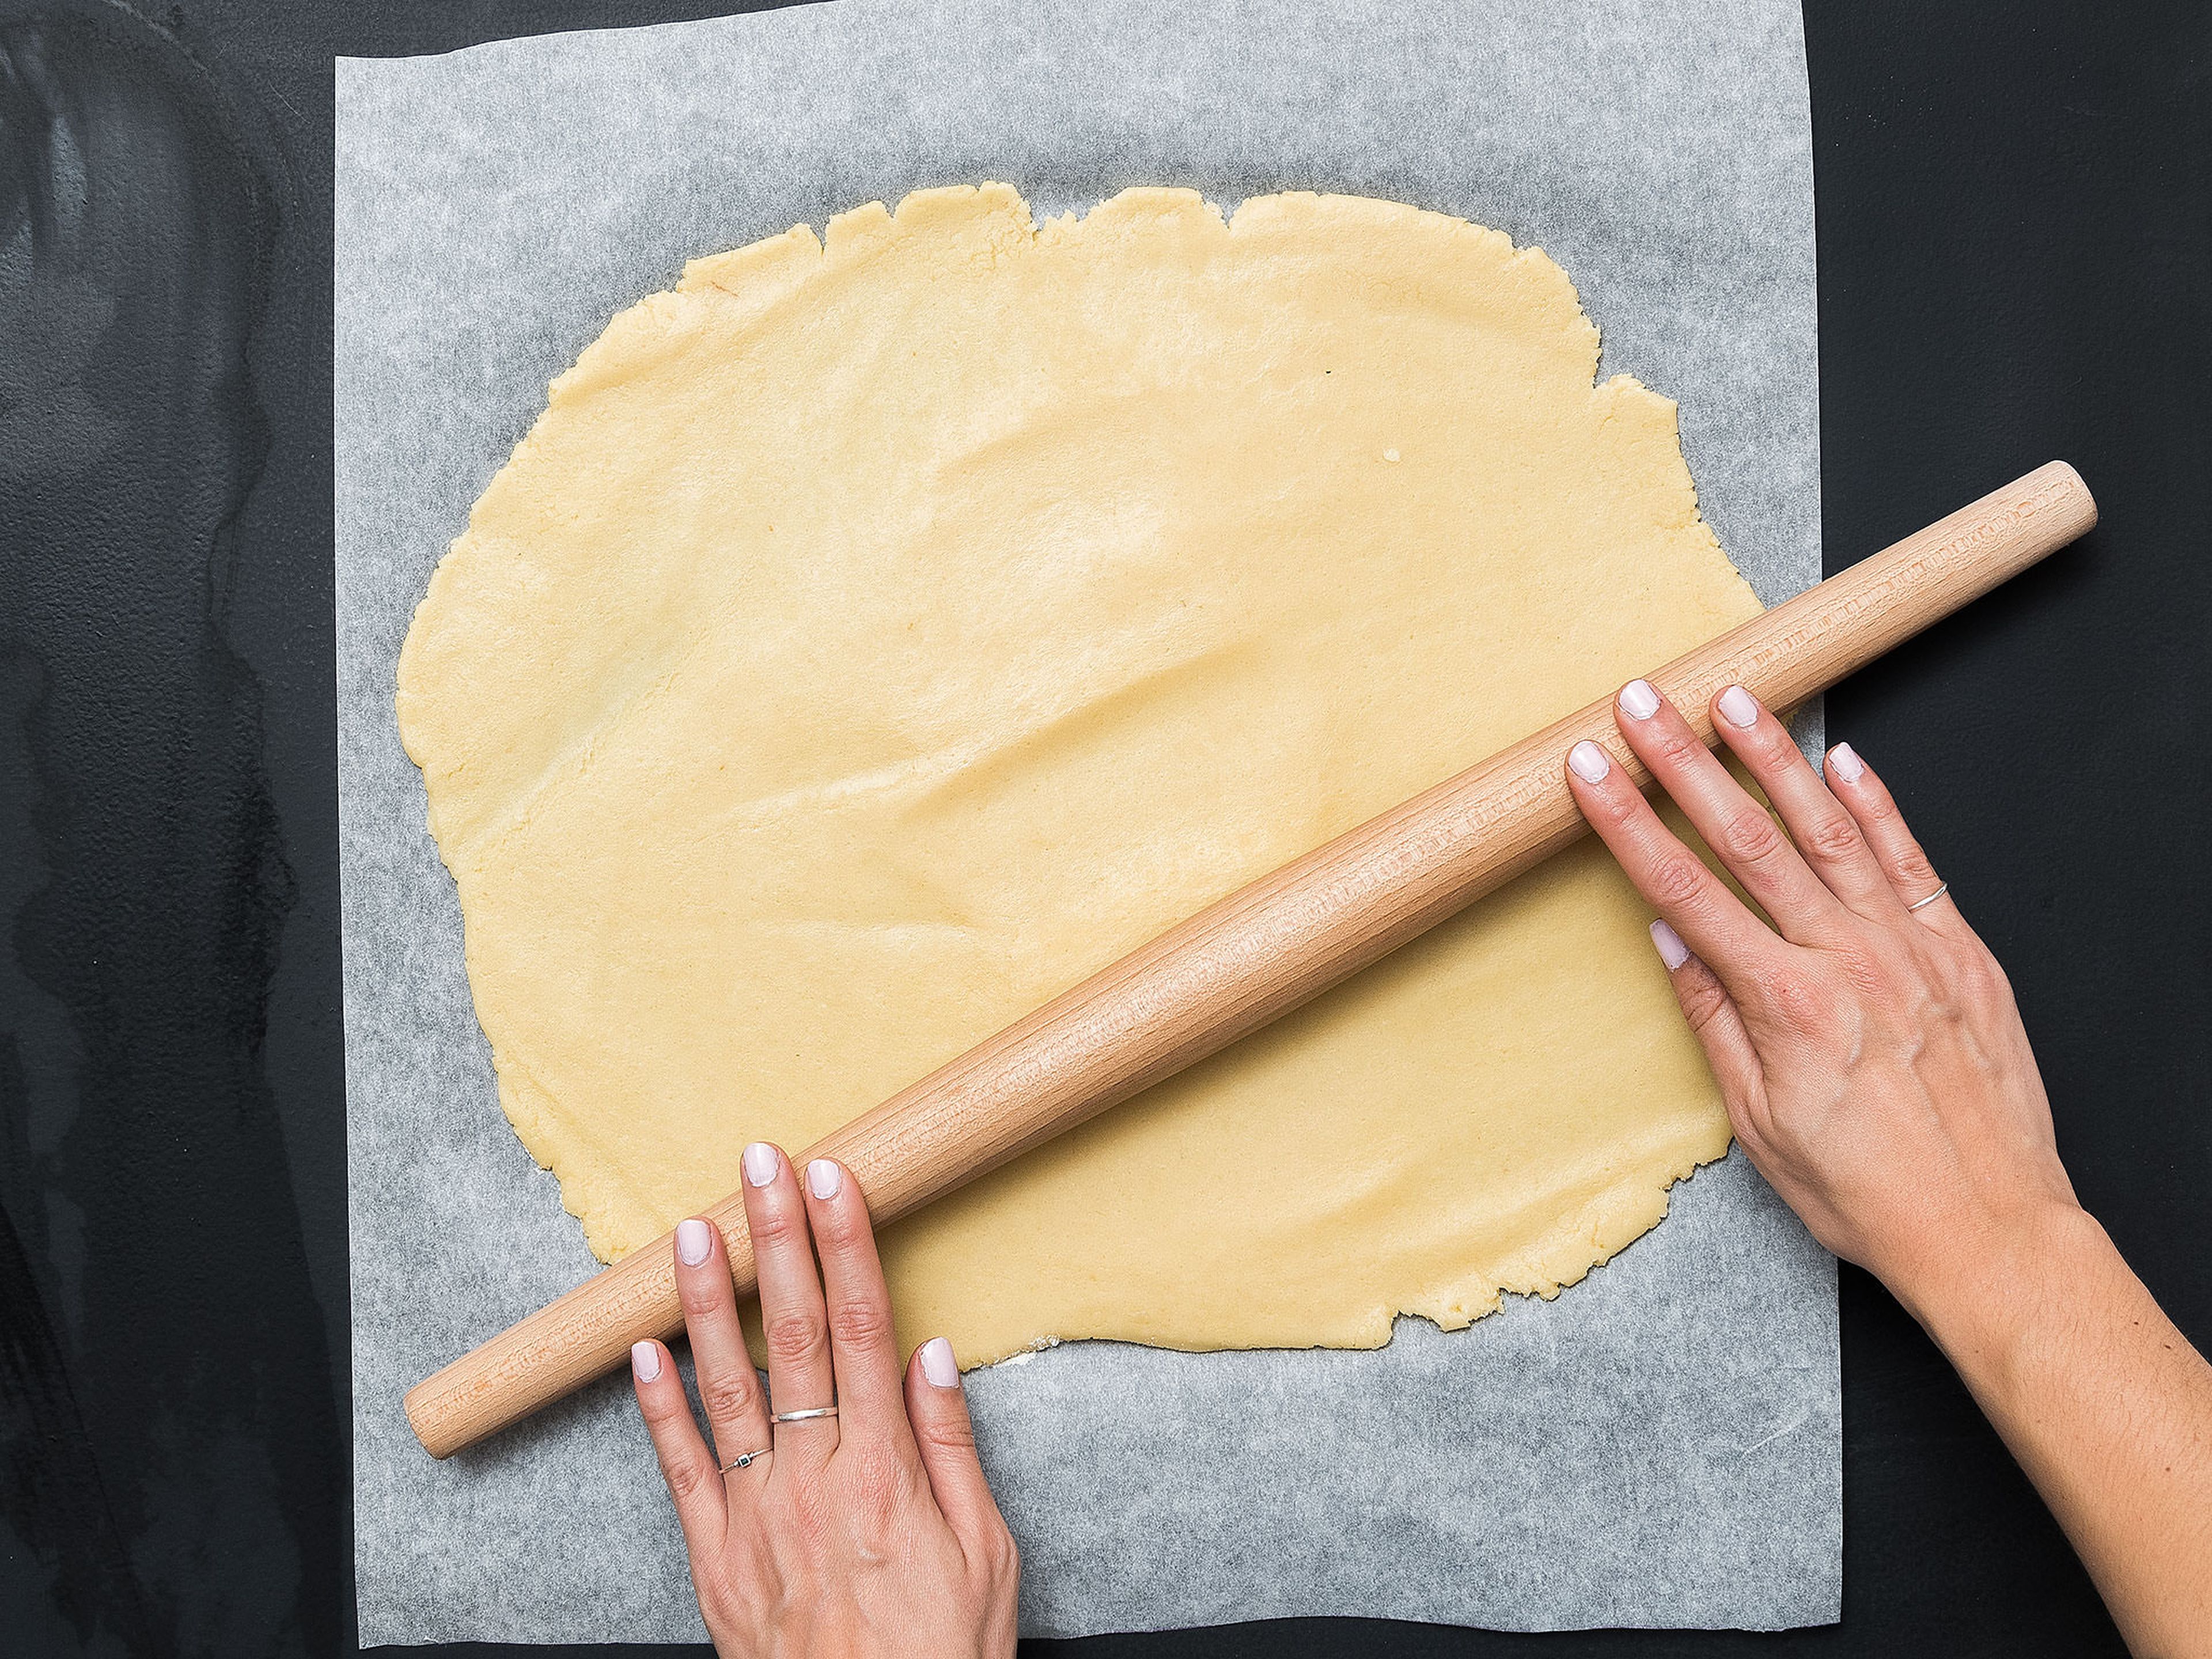 Take the doughs out of the fridge and roll each out separately on parchment paper to approx. 1 cm/ 0.5 in. thick. Place the black dough on top of the white dough and lightly press to seal. Carefully roll into a log to create a spiral. Wrap and transfer to the freezer for approx. 20 – 30 min.